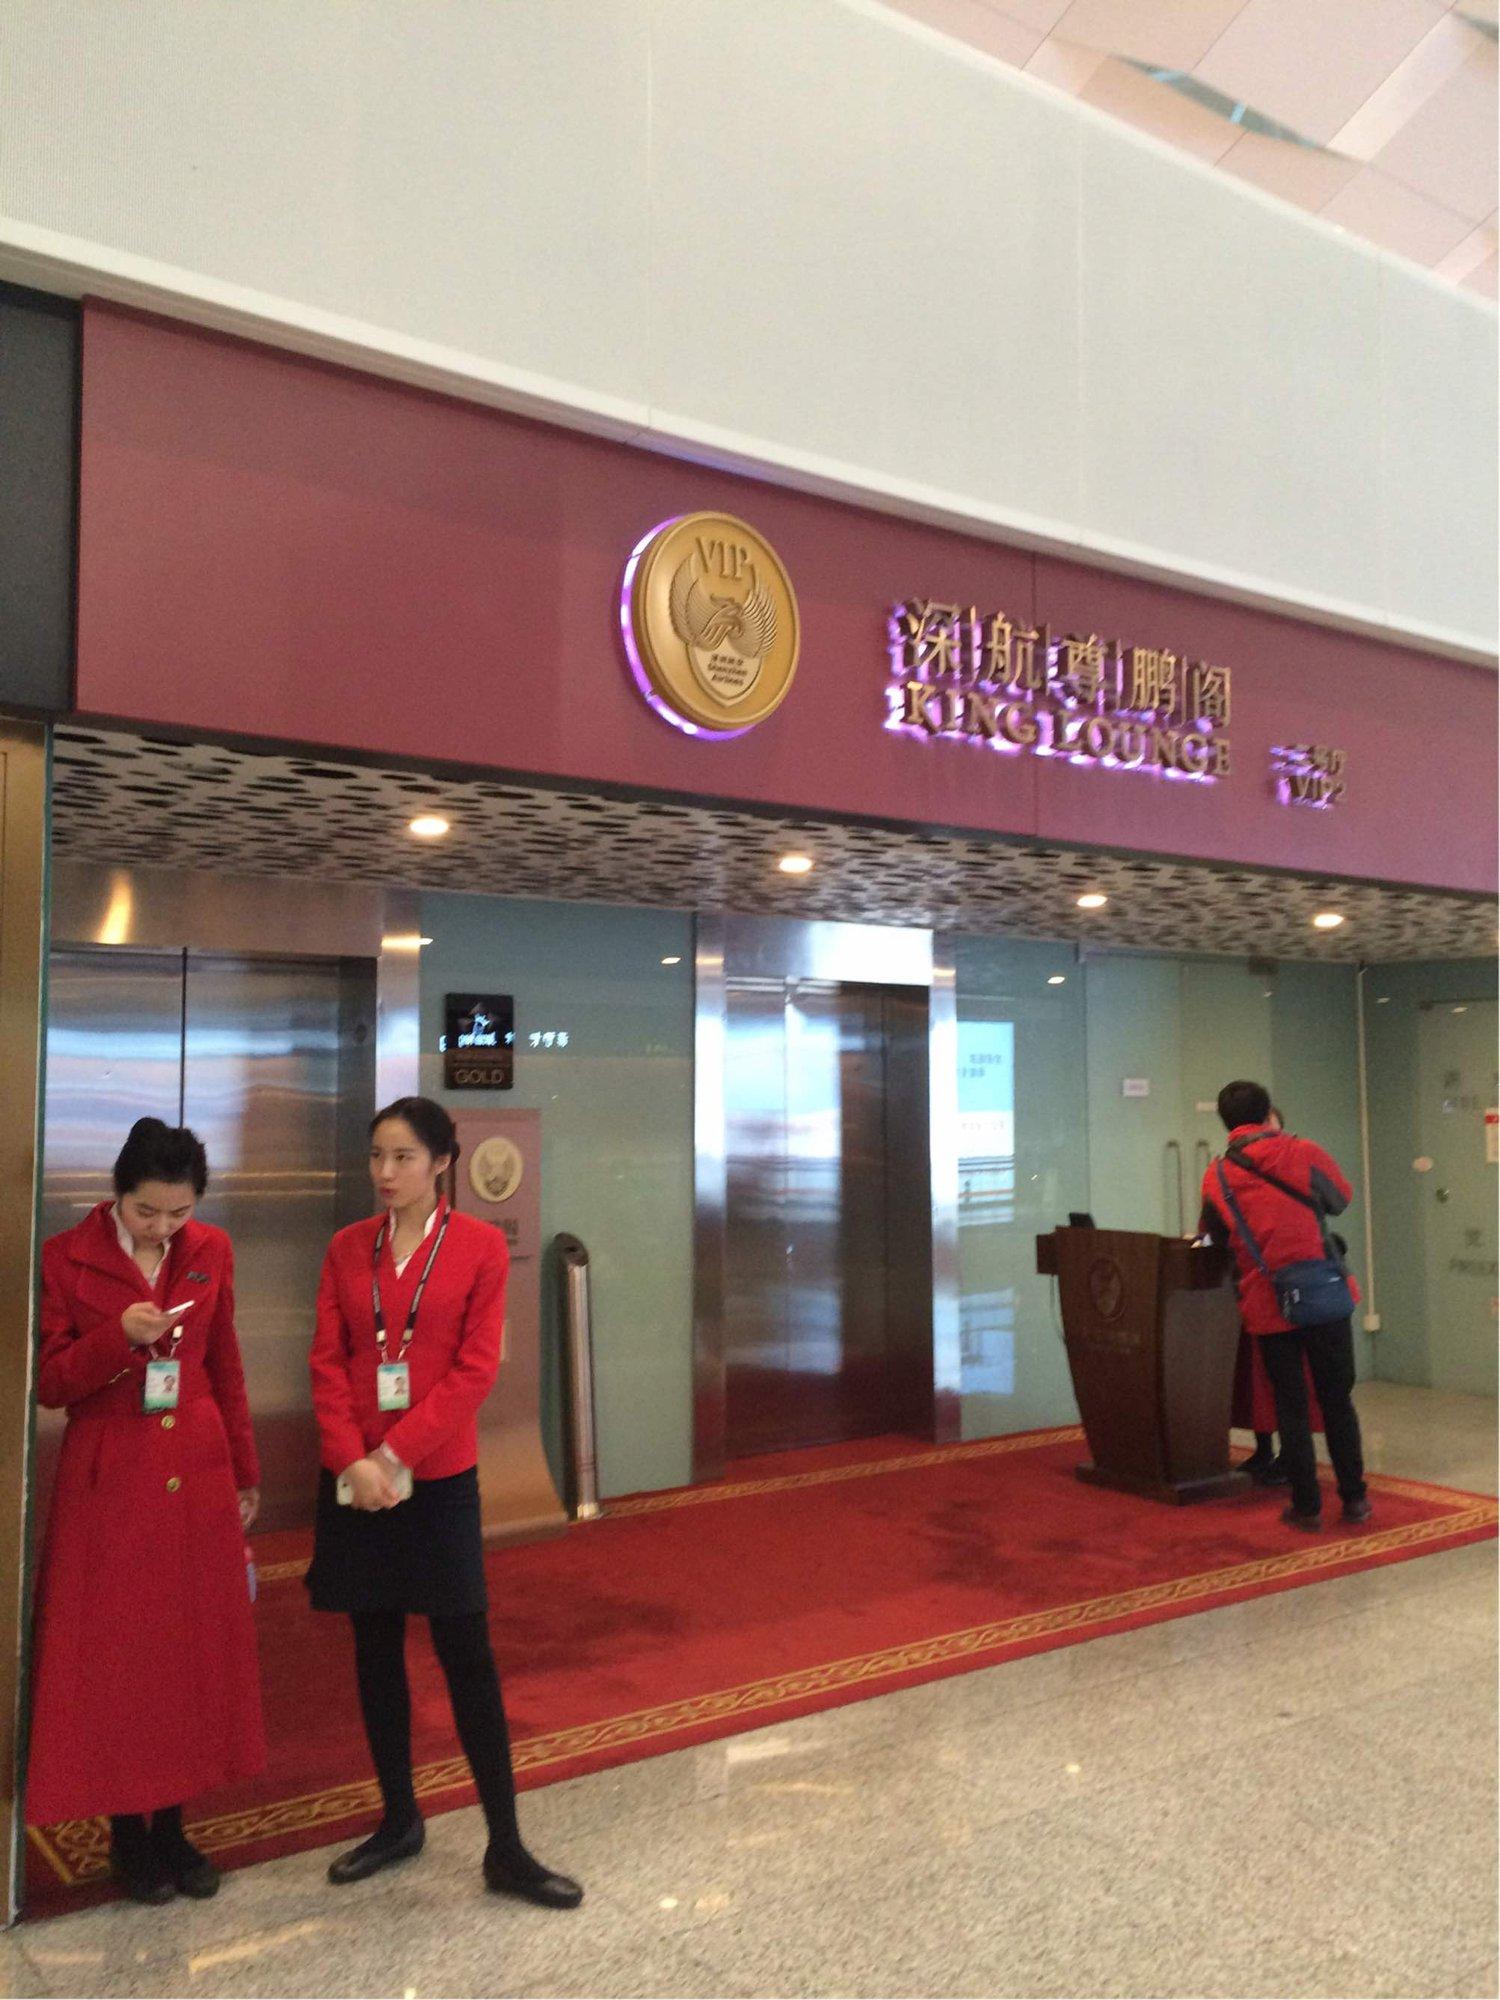 Shenzhen Airlines King Lounge Hall 2 image 2 of 7